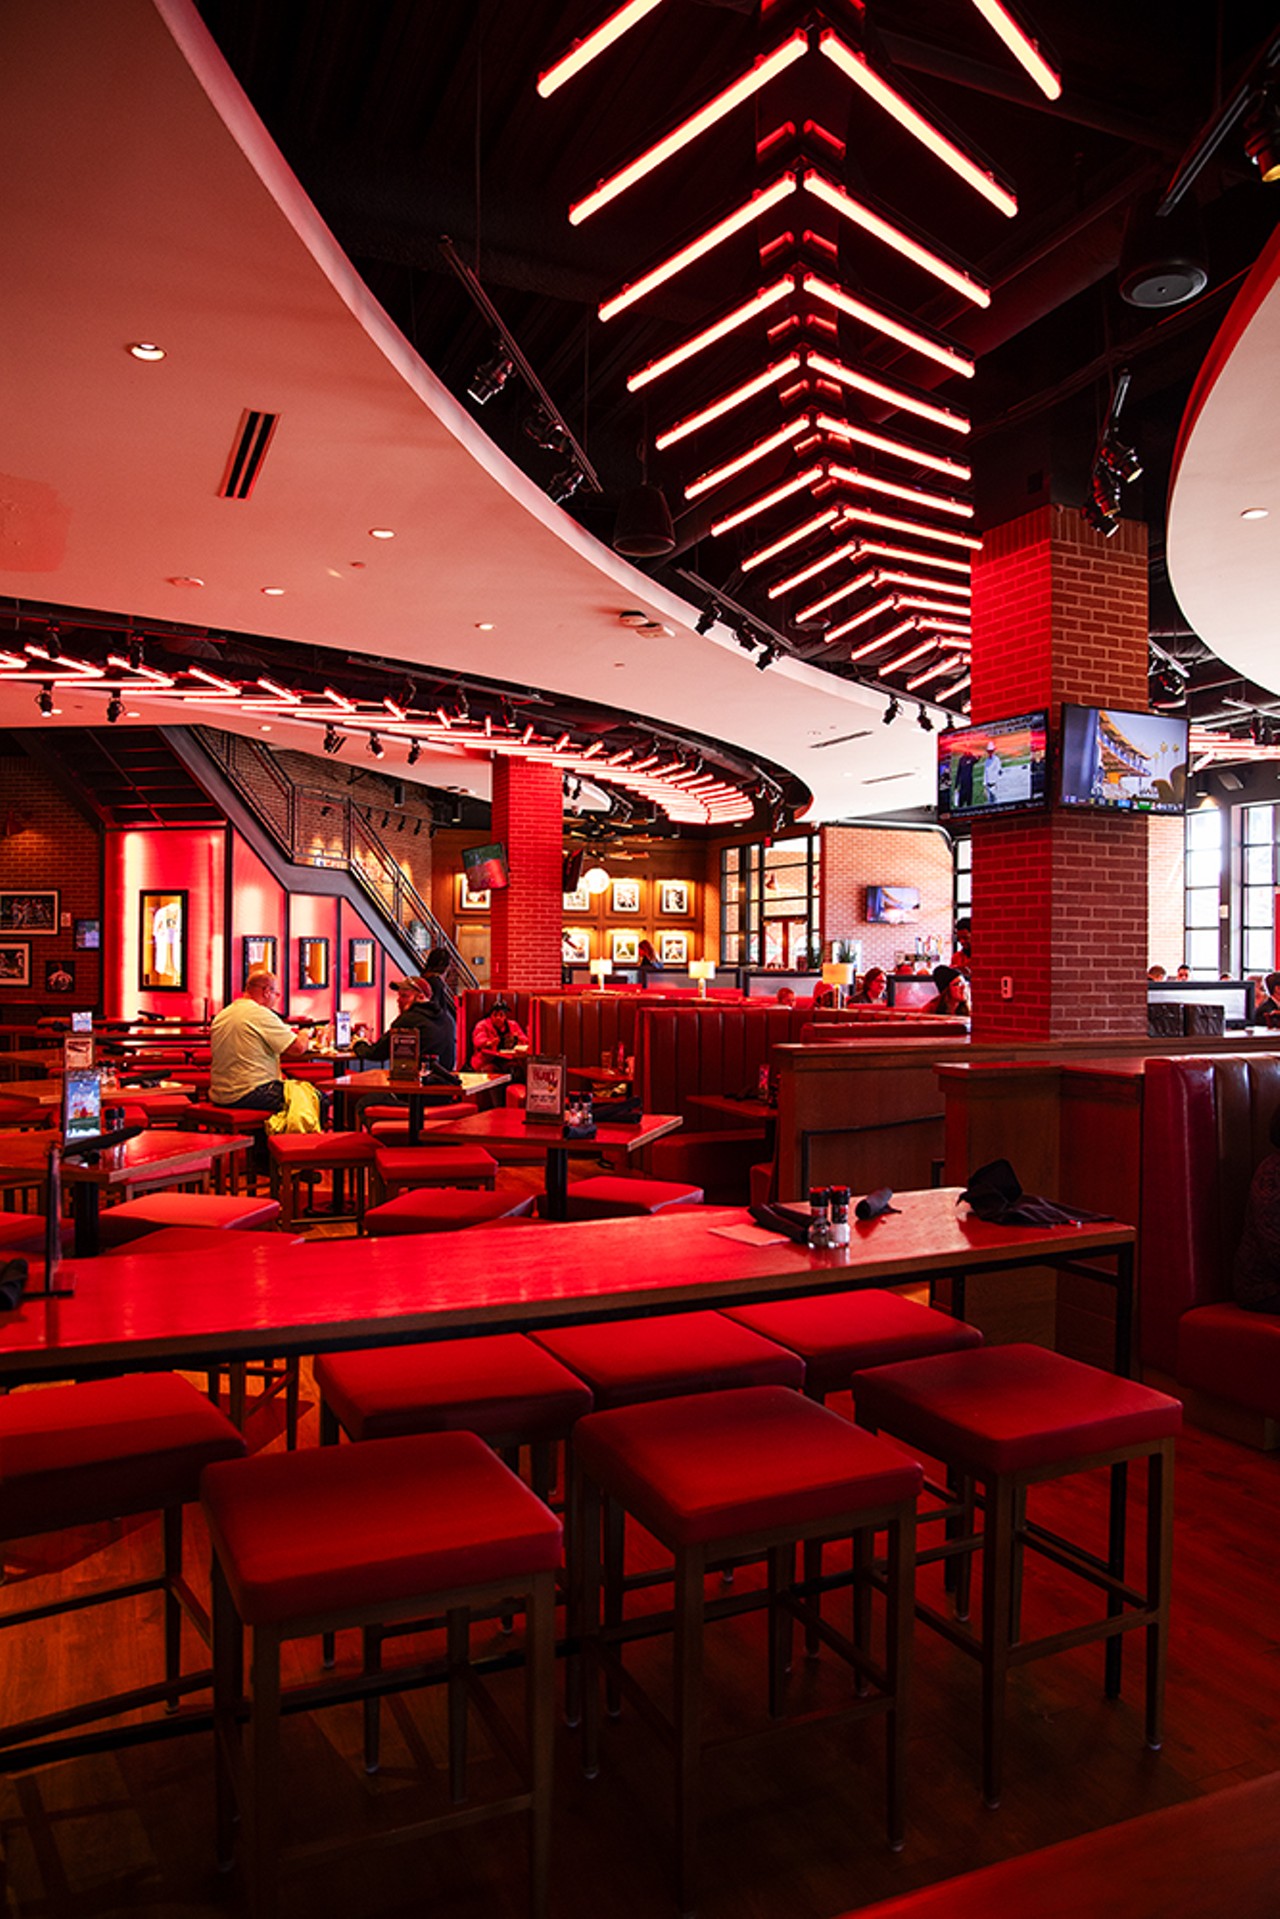 The 34,000-square-foot restaurant, bar and venue Cardinals Nation is a popular gathering spot.